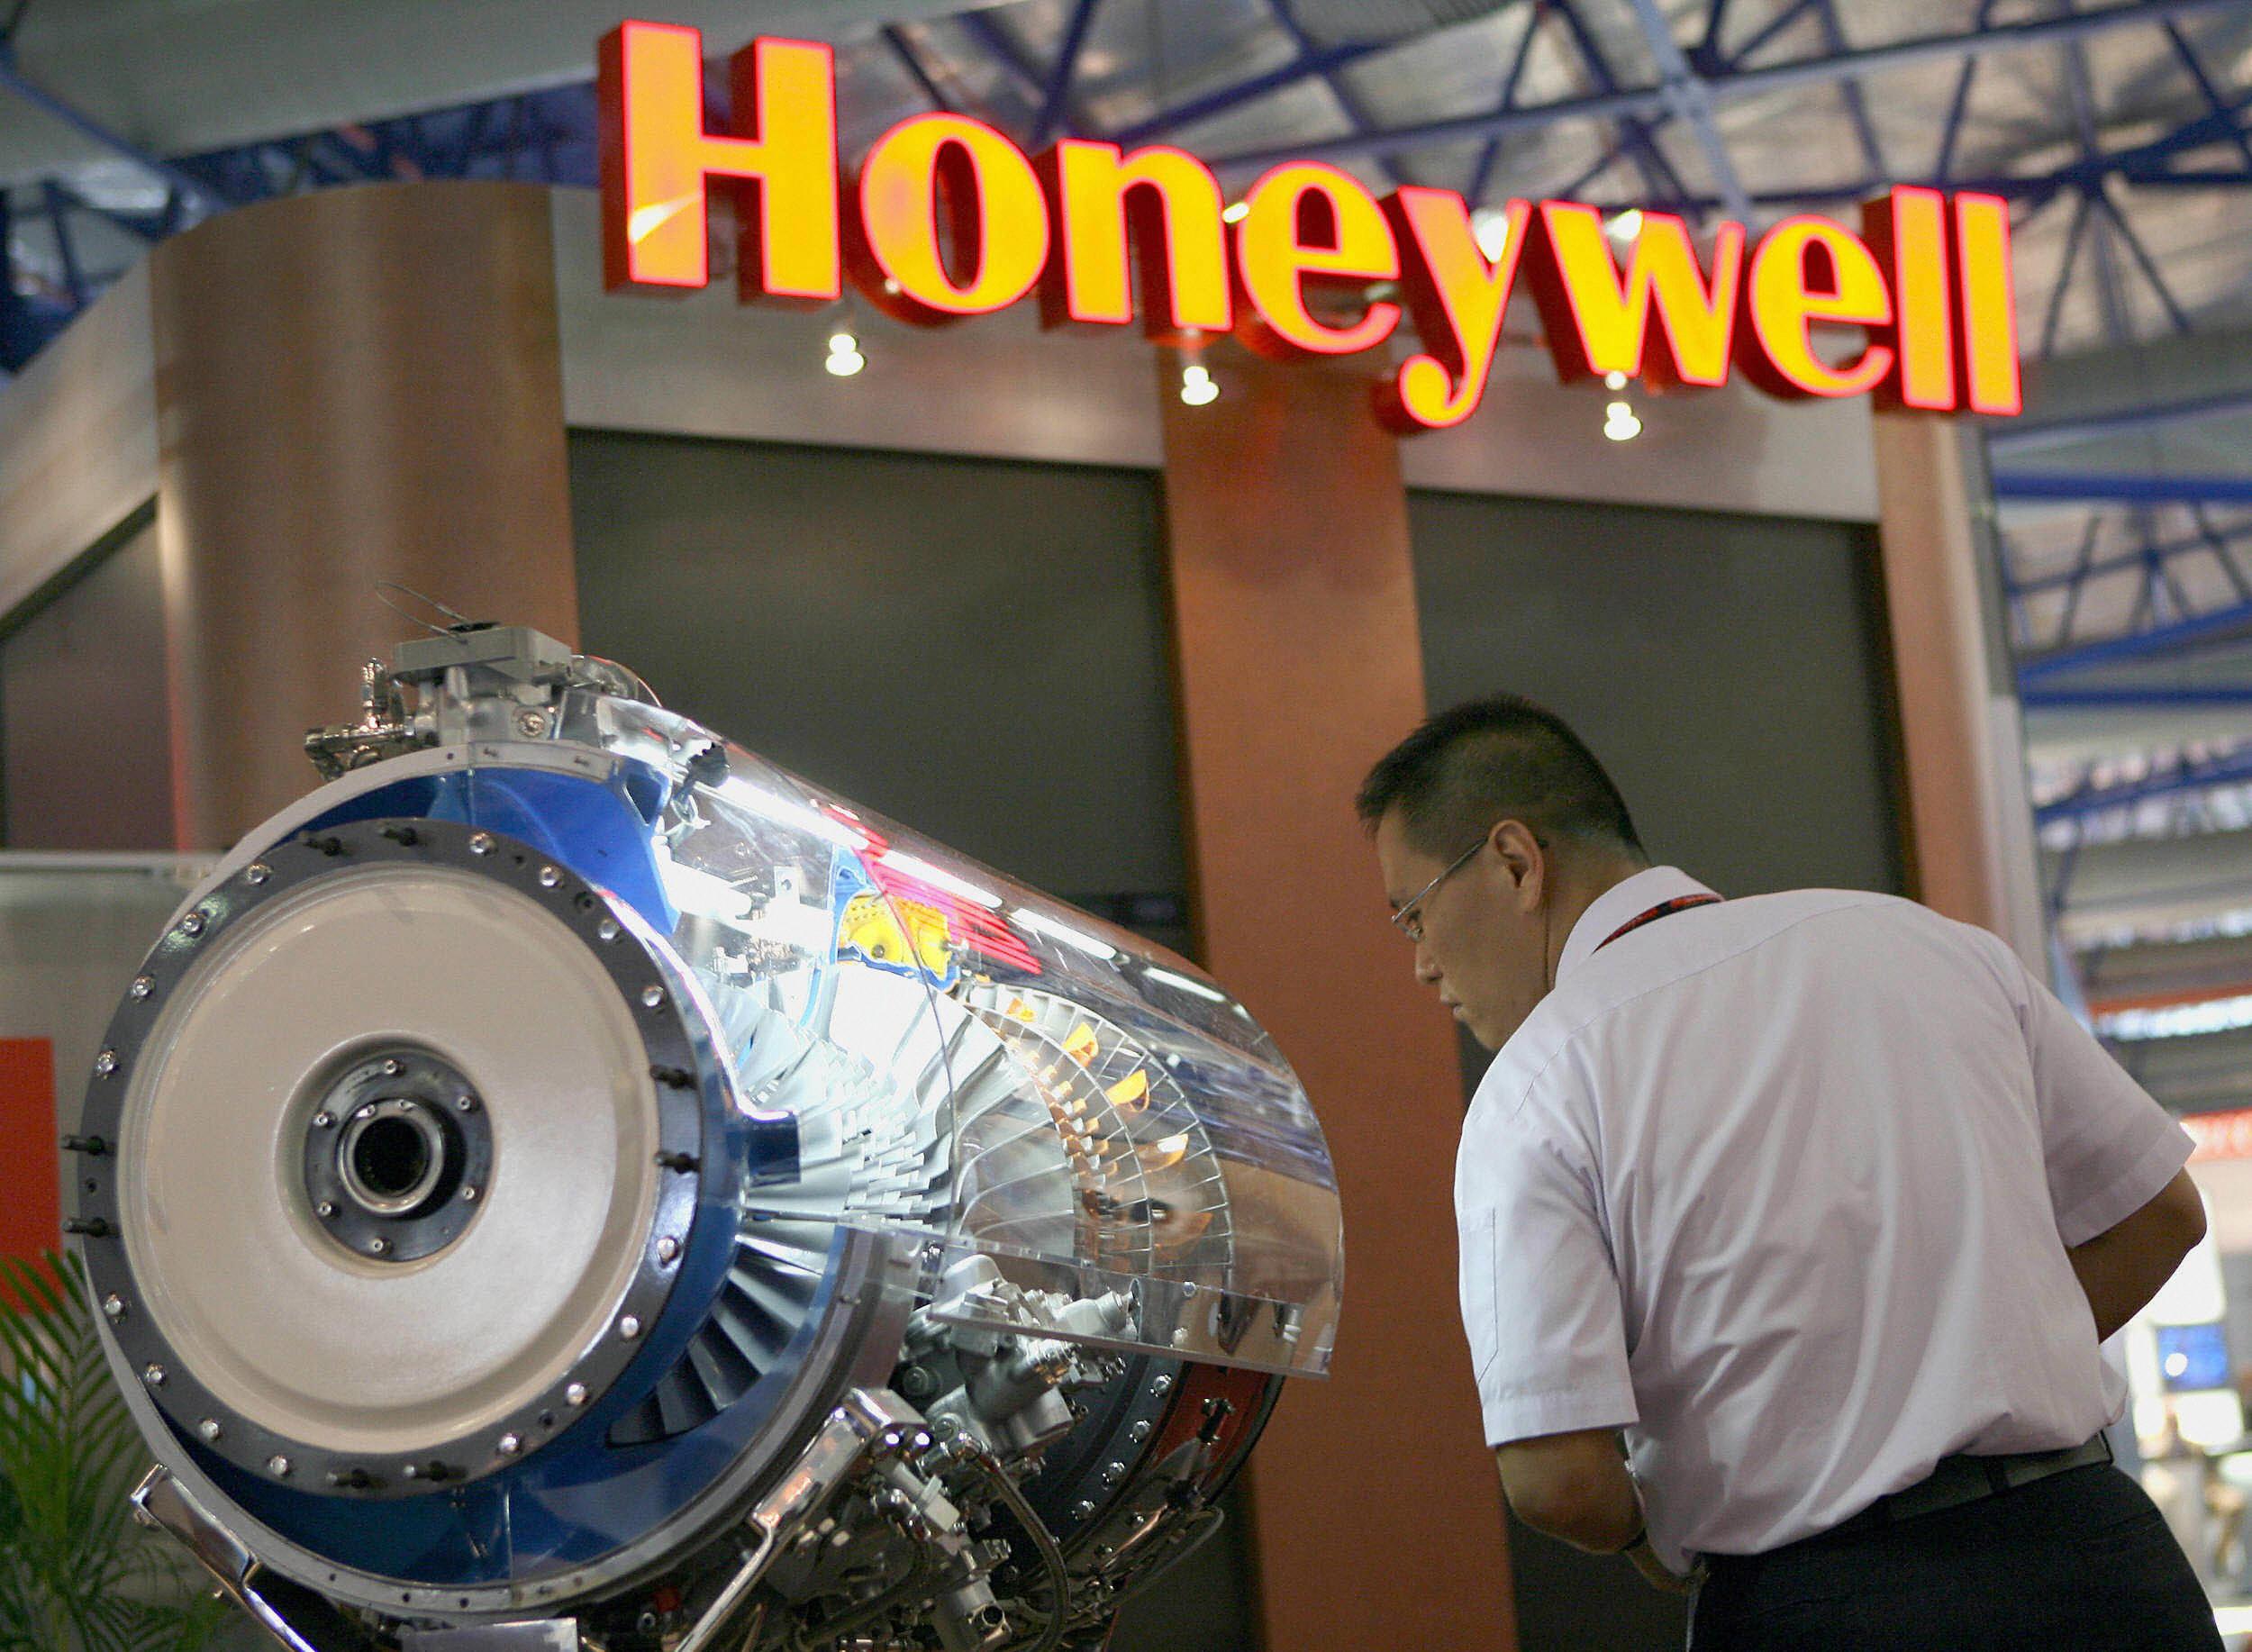 A man viewing a Honeywell aircraft engine on display.